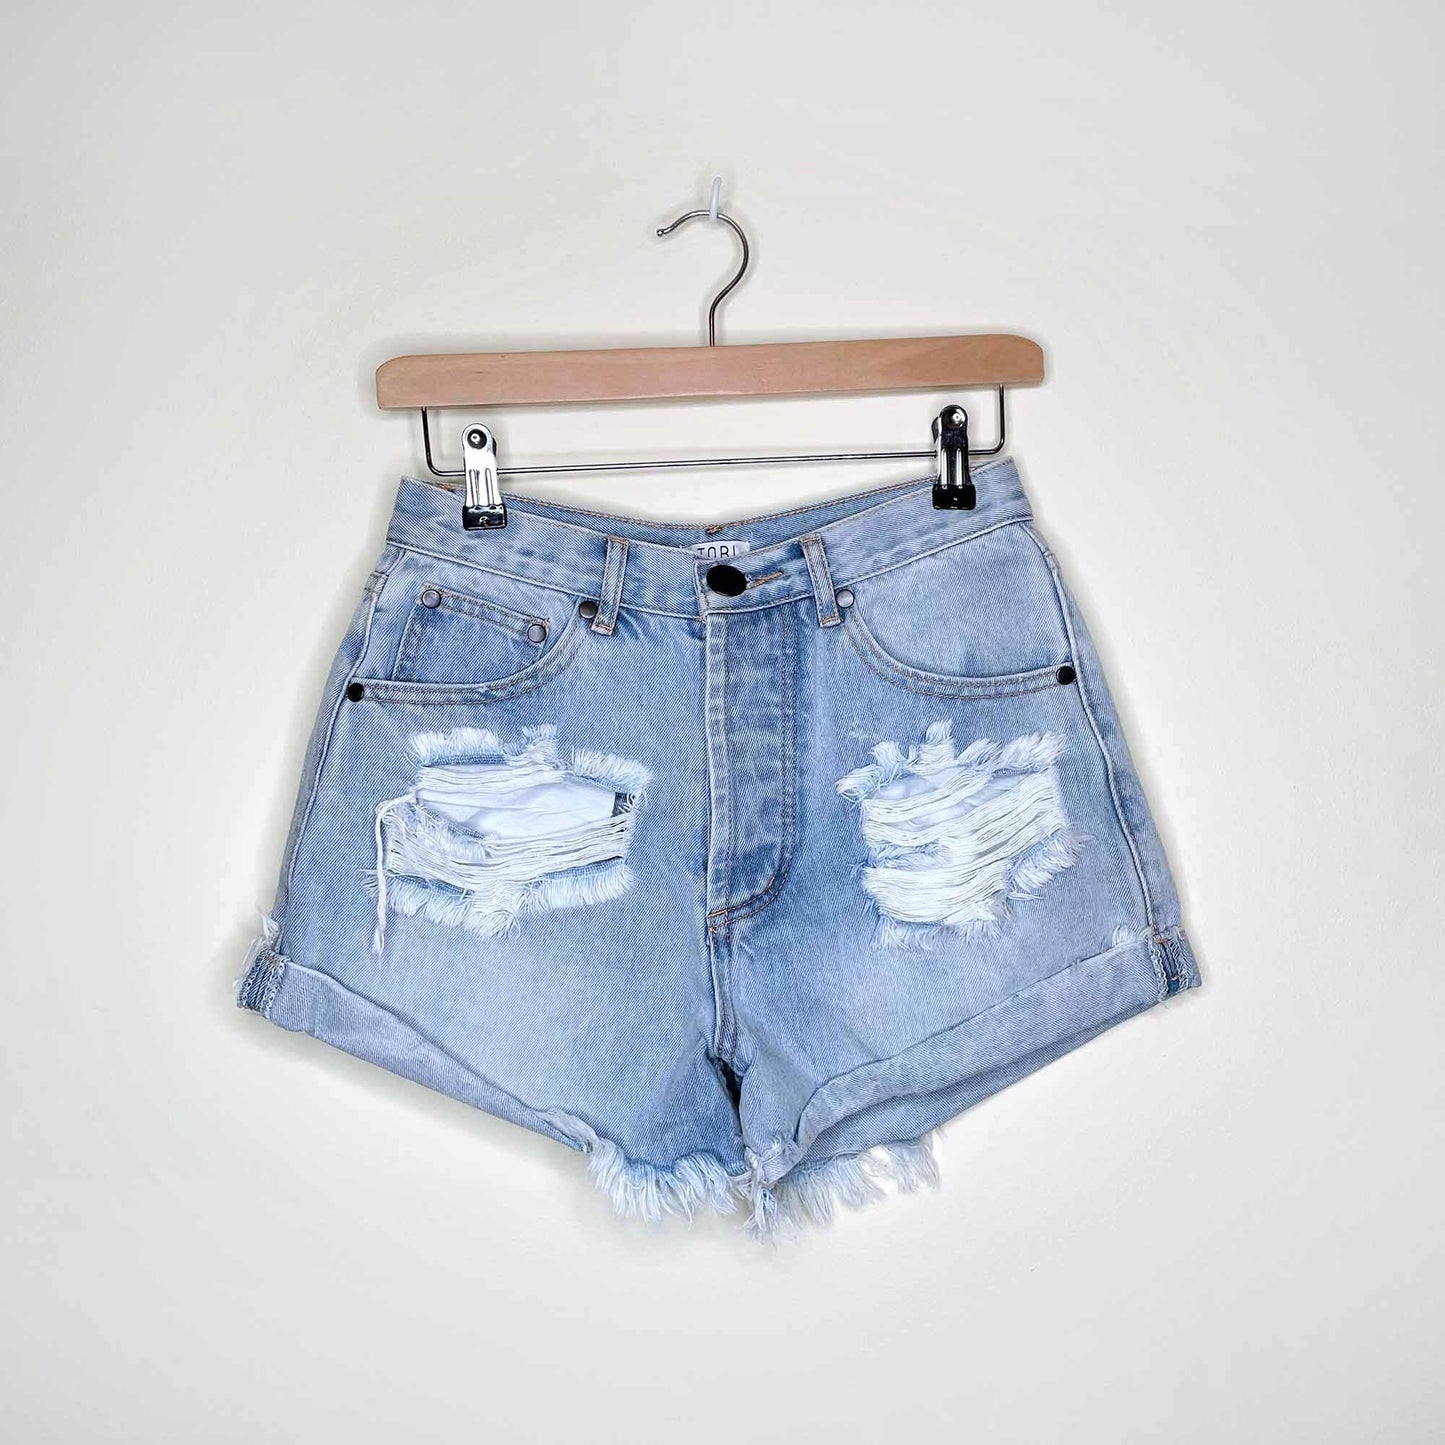 TOBI high rise button fly distressed jean shorts - size 27